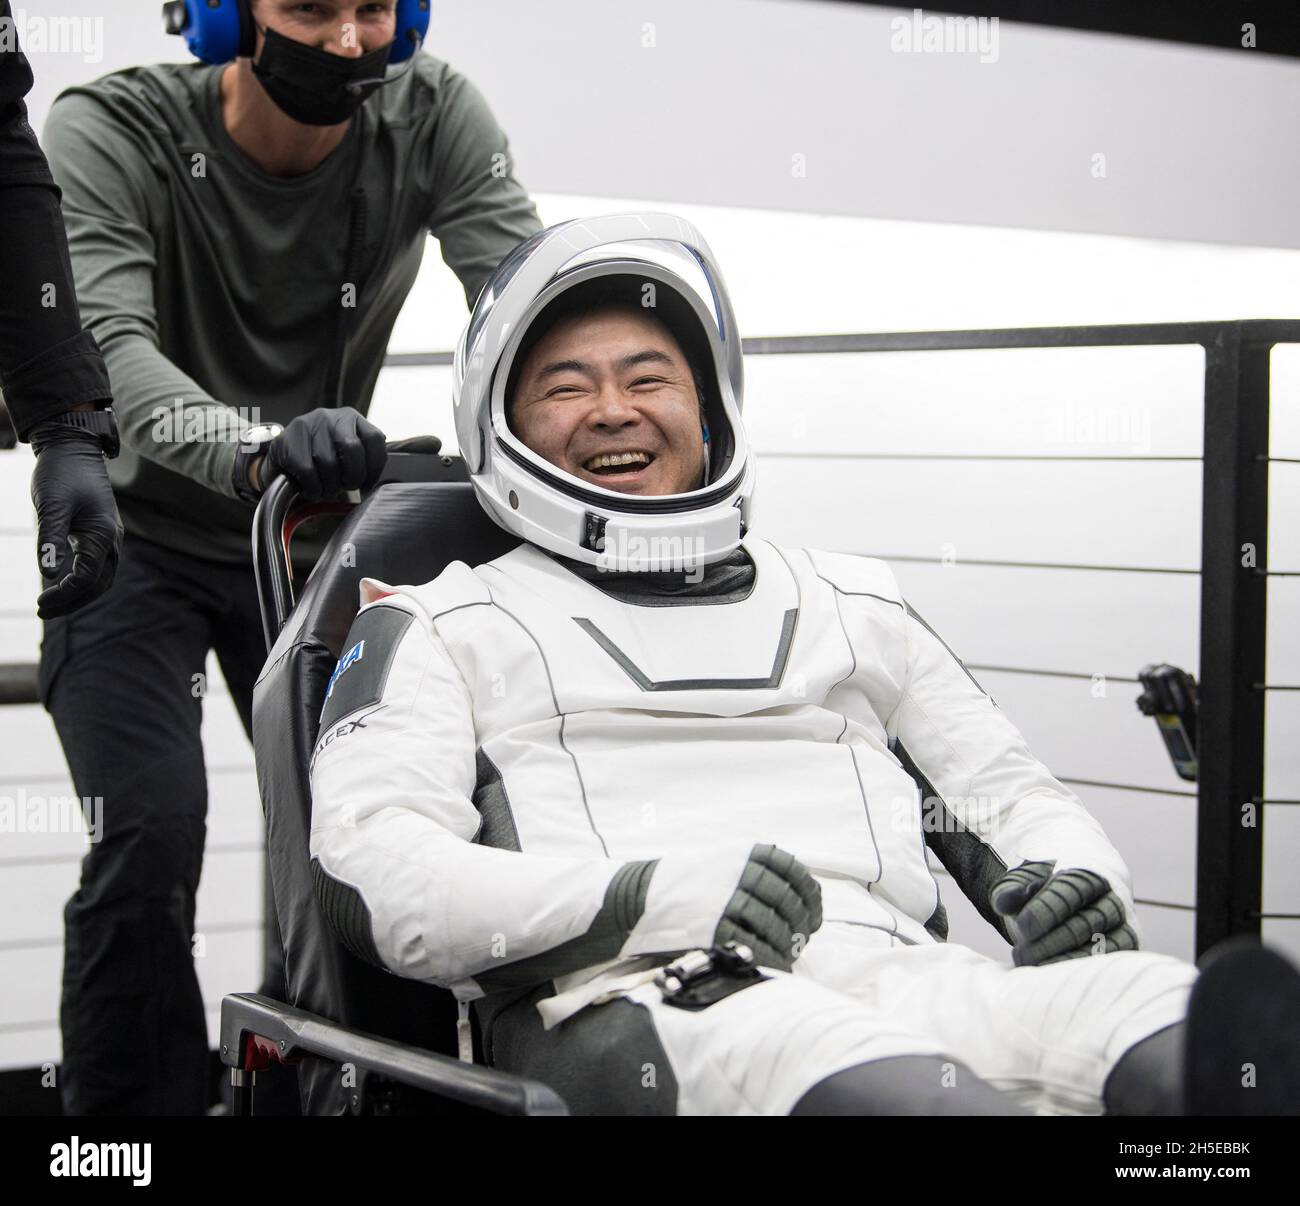 Japan Aerospace Exploration Agency (JAXA) astronaut Aki Hoshide reacts to a comment after being helped out of the SpaceX Crew Dragon Endeavour spacecraft onboard the SpaceX GO Navigator recovery ship after he and NASA astronauts Shane Kimbrough and Megan McArthur, and ESA (European Space Agency) astronaut Thomas Pesquet landed in the Gulf of Mexico off the coast of Pensacola, Florida, Monday, Nov. 8, 2021. NASA’s SpaceX Crew-2 mission is the second operational mission of the SpaceX Crew Dragon spacecraft and Falcon 9 rocket to the International Space Station as part of the agency’s Commercial Stock Photo